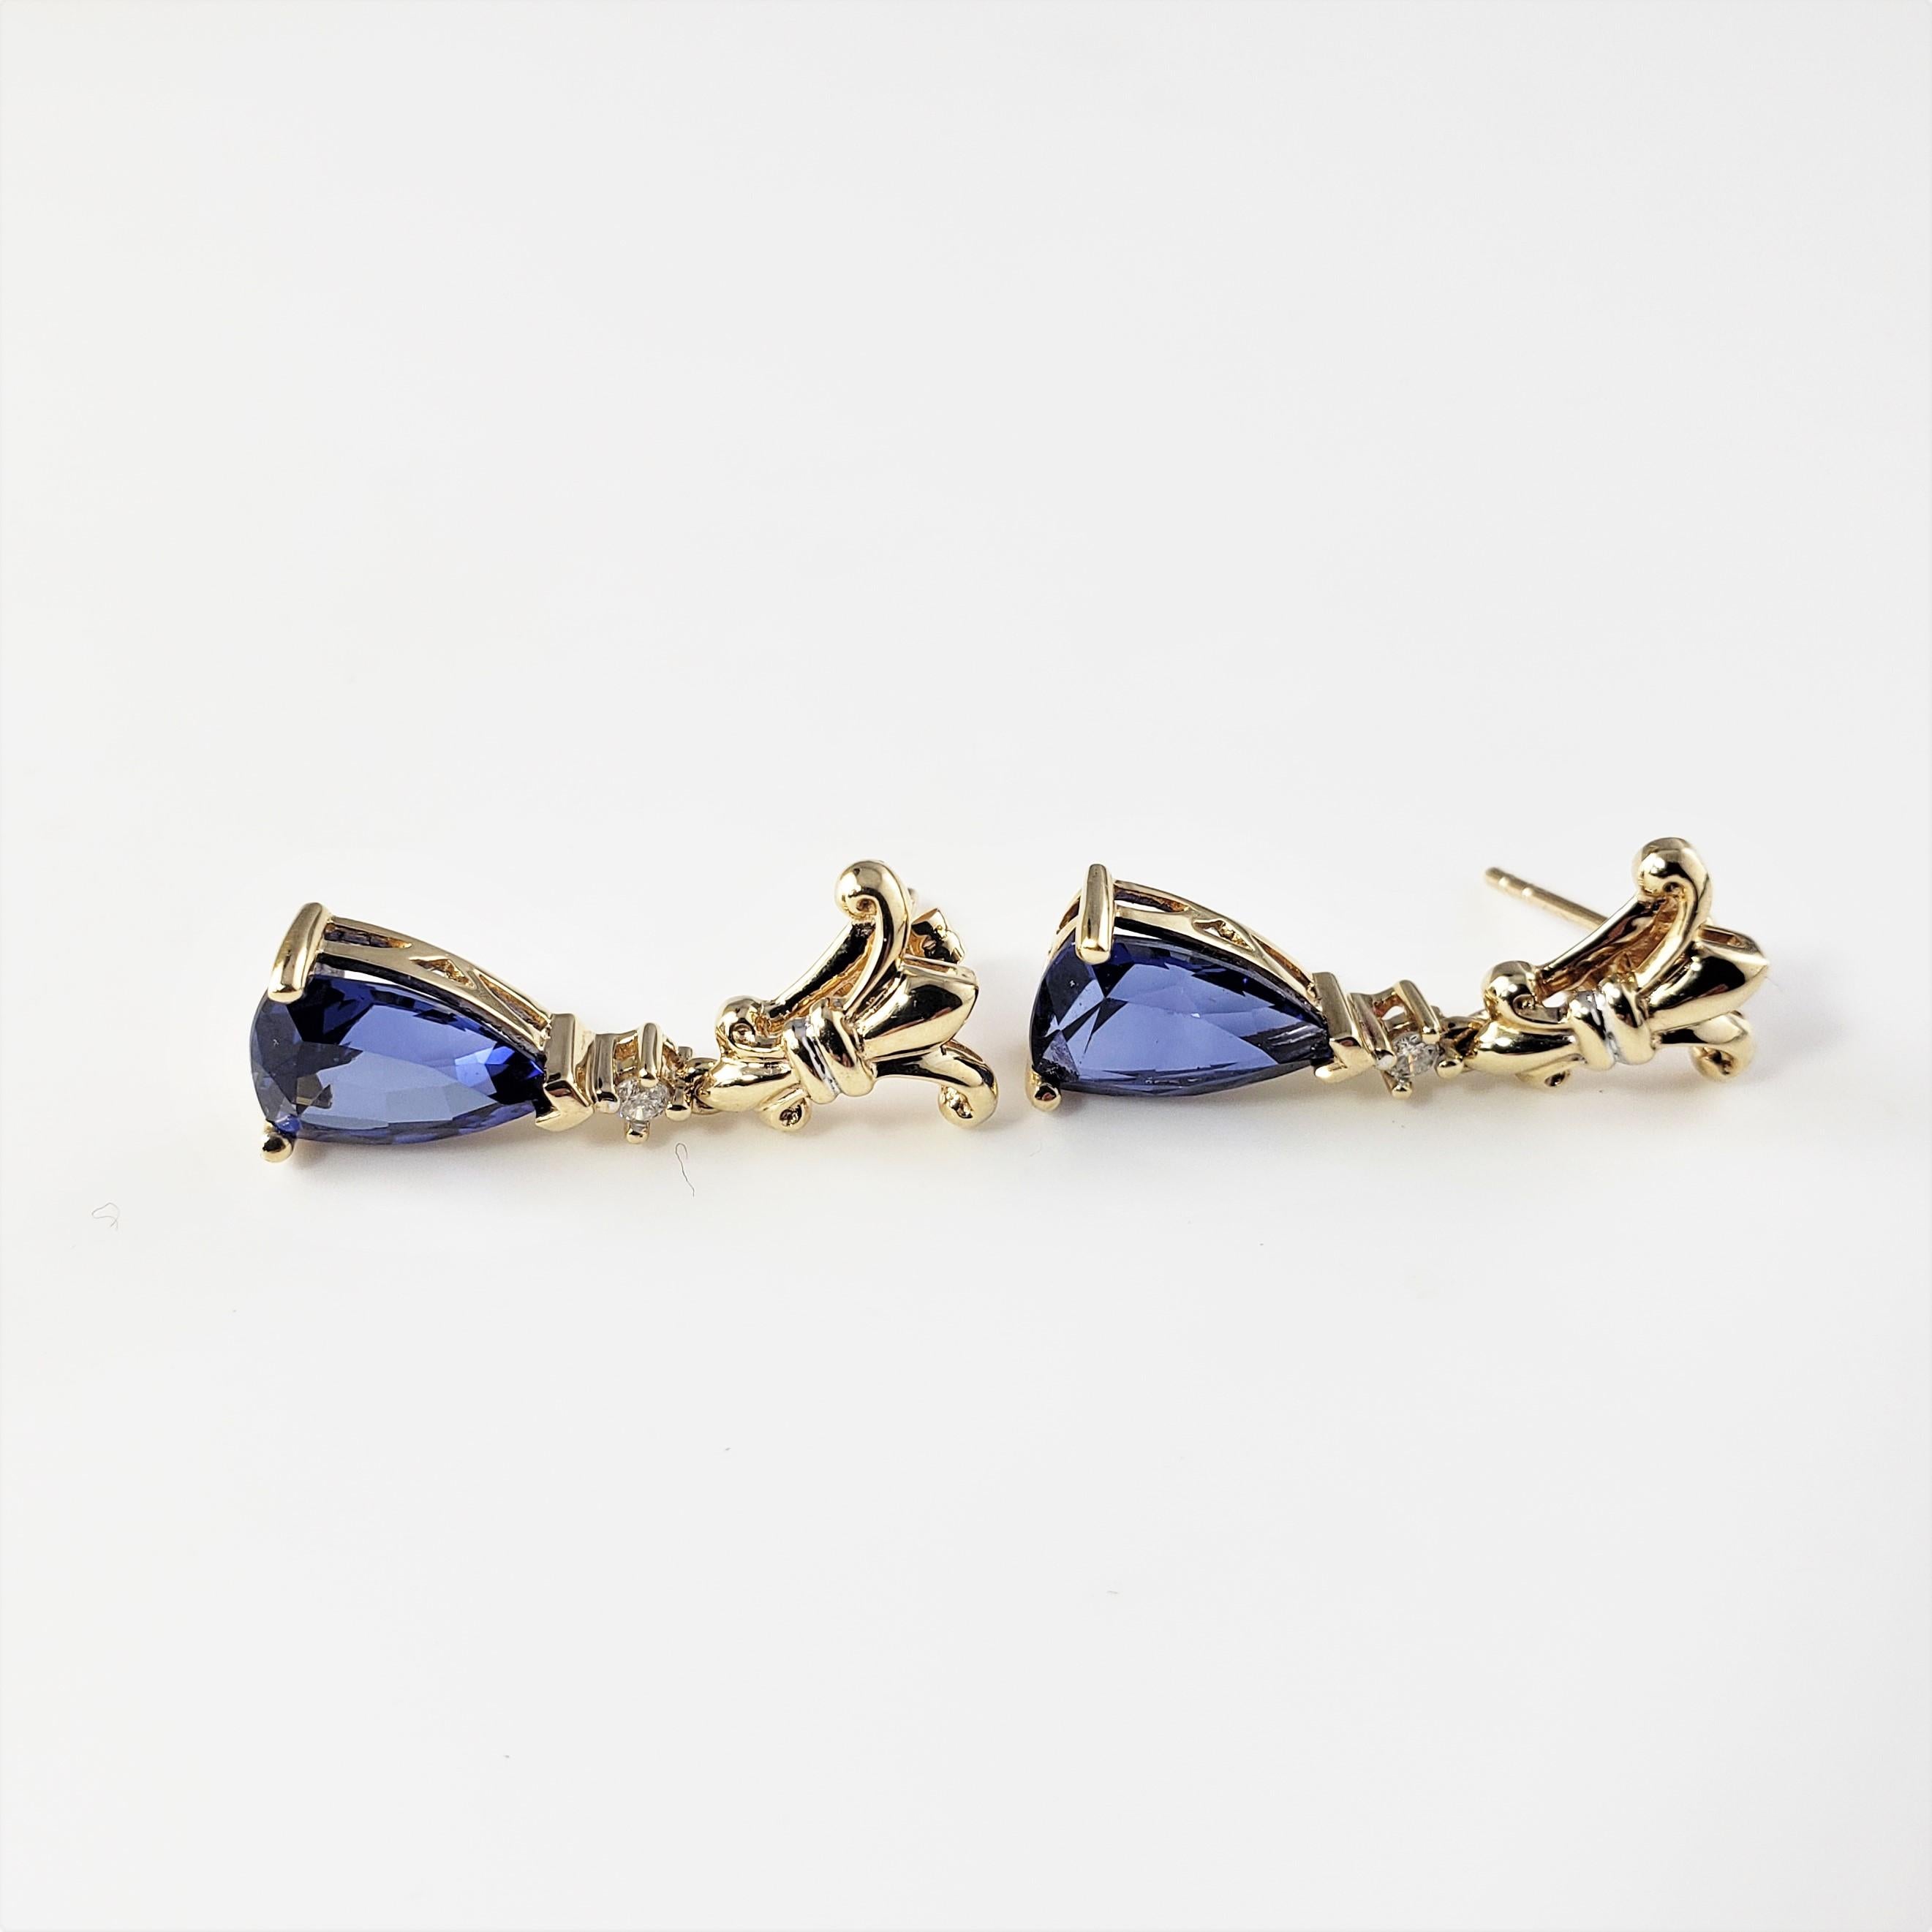 10 Karat Yellow Gold Tanzanite and Diamond Earrings-

These elegant dangling earrings each feature one pear shaped tanzanite (10 mm x 8 mm) and one round brilliant cut diamond set in beautifully detailed 10K yellow gold.

Total tanzanite weight: 